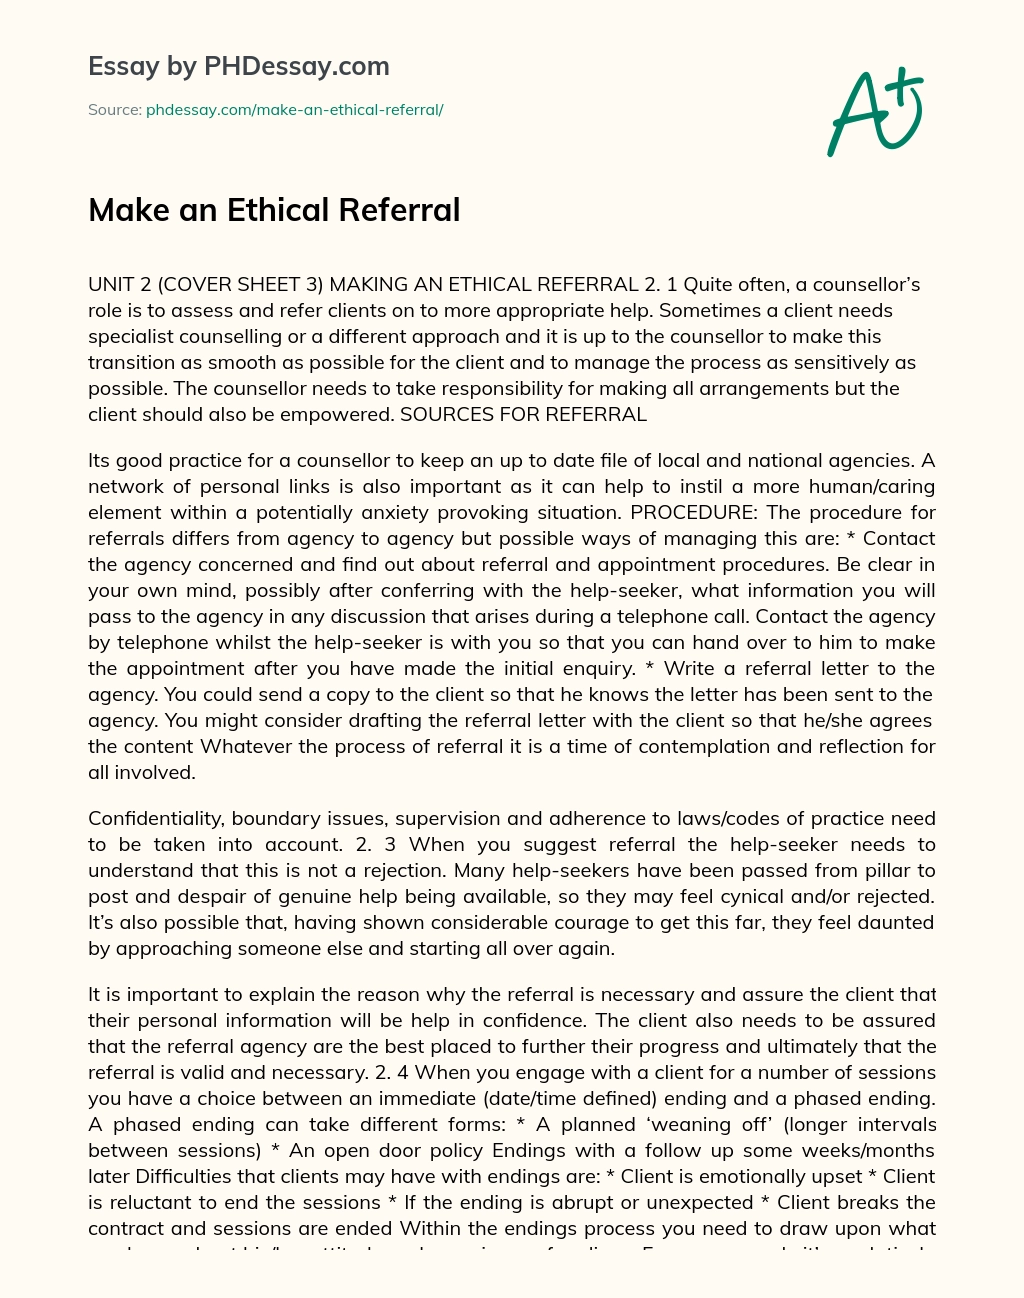 Make an Ethical Referral essay